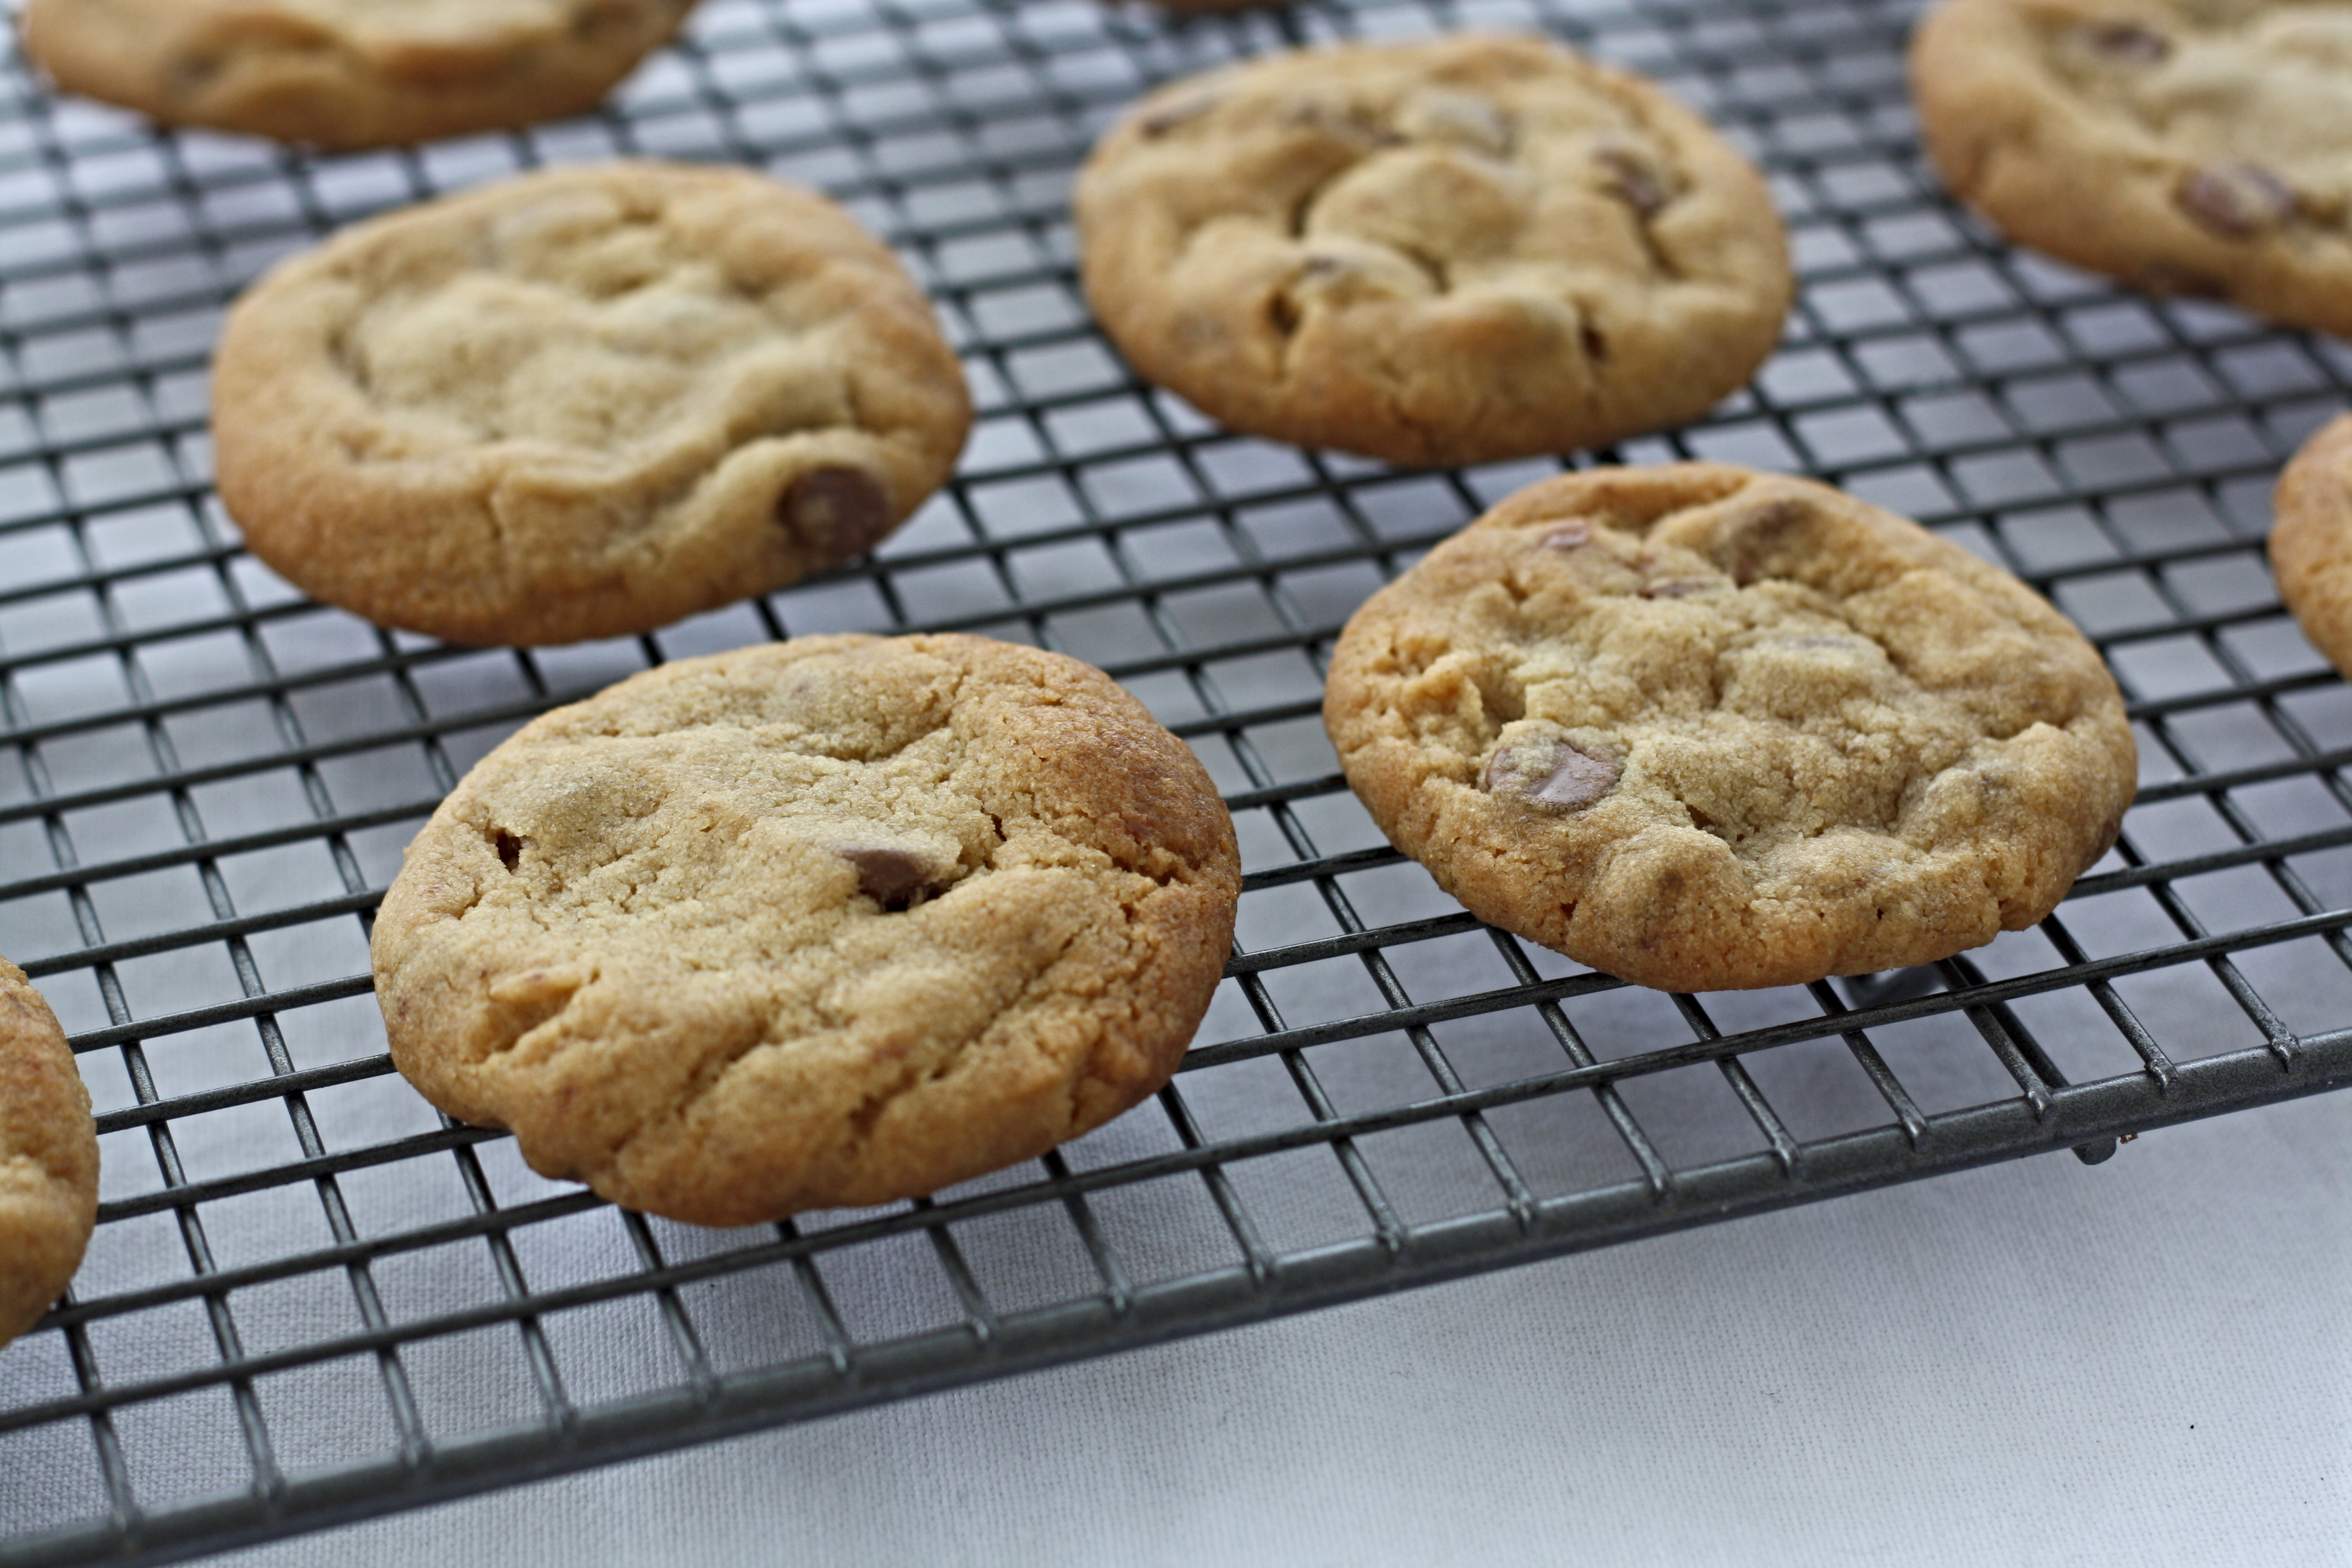 quick and easy chocolate chip cookies